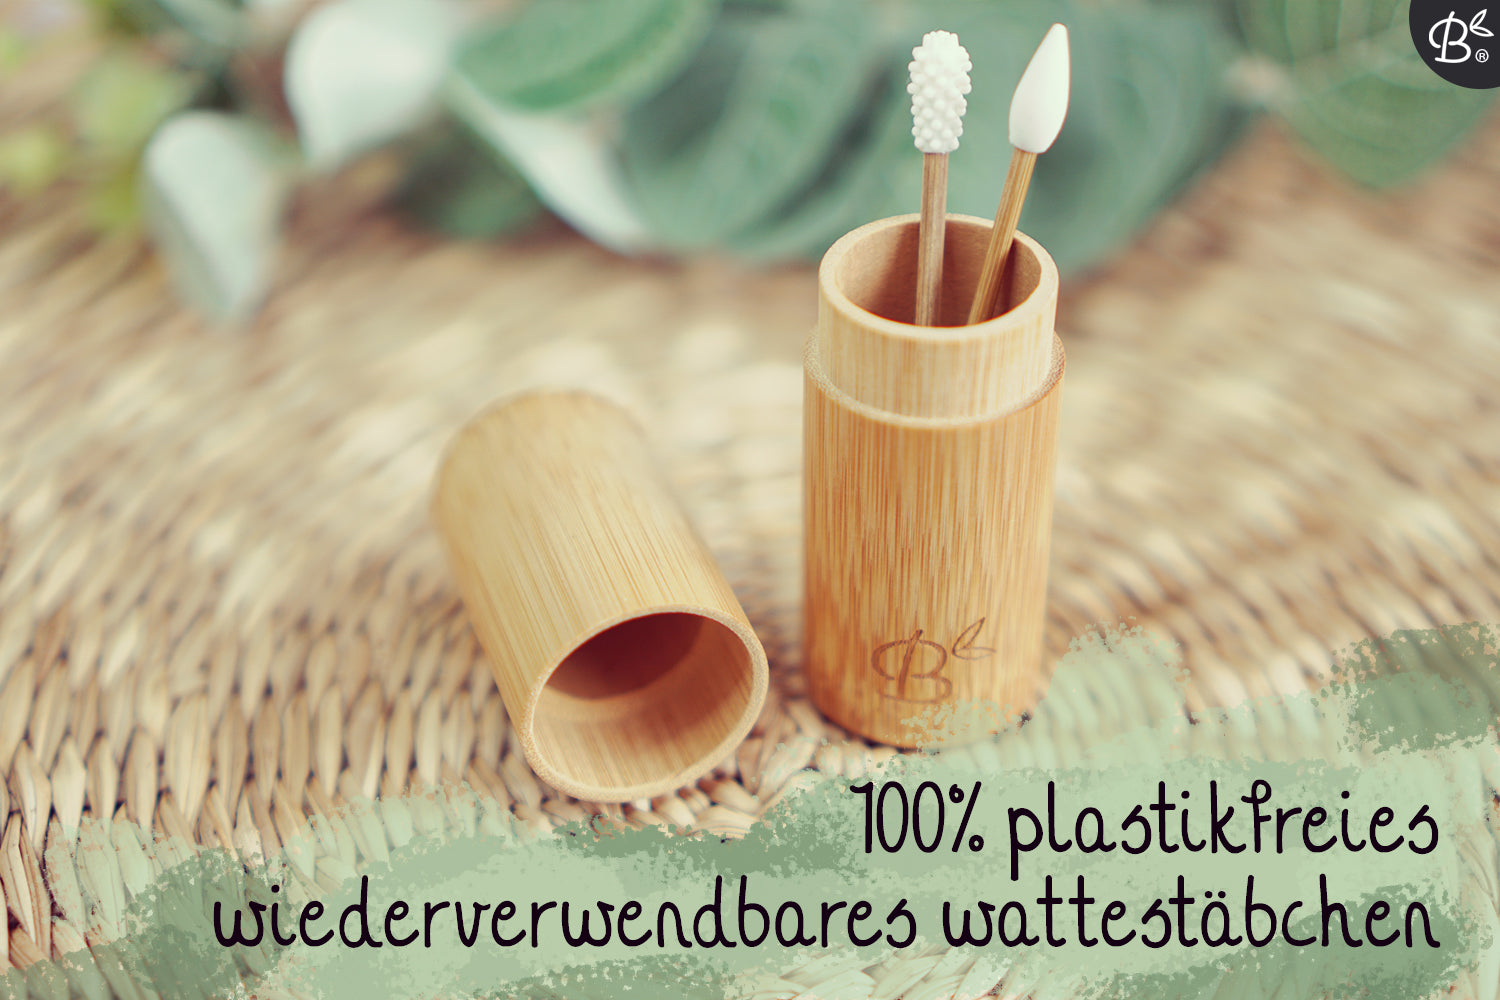 🌍 The First 100% Plastic-Free Reusable Bamboo Cotton Swabs